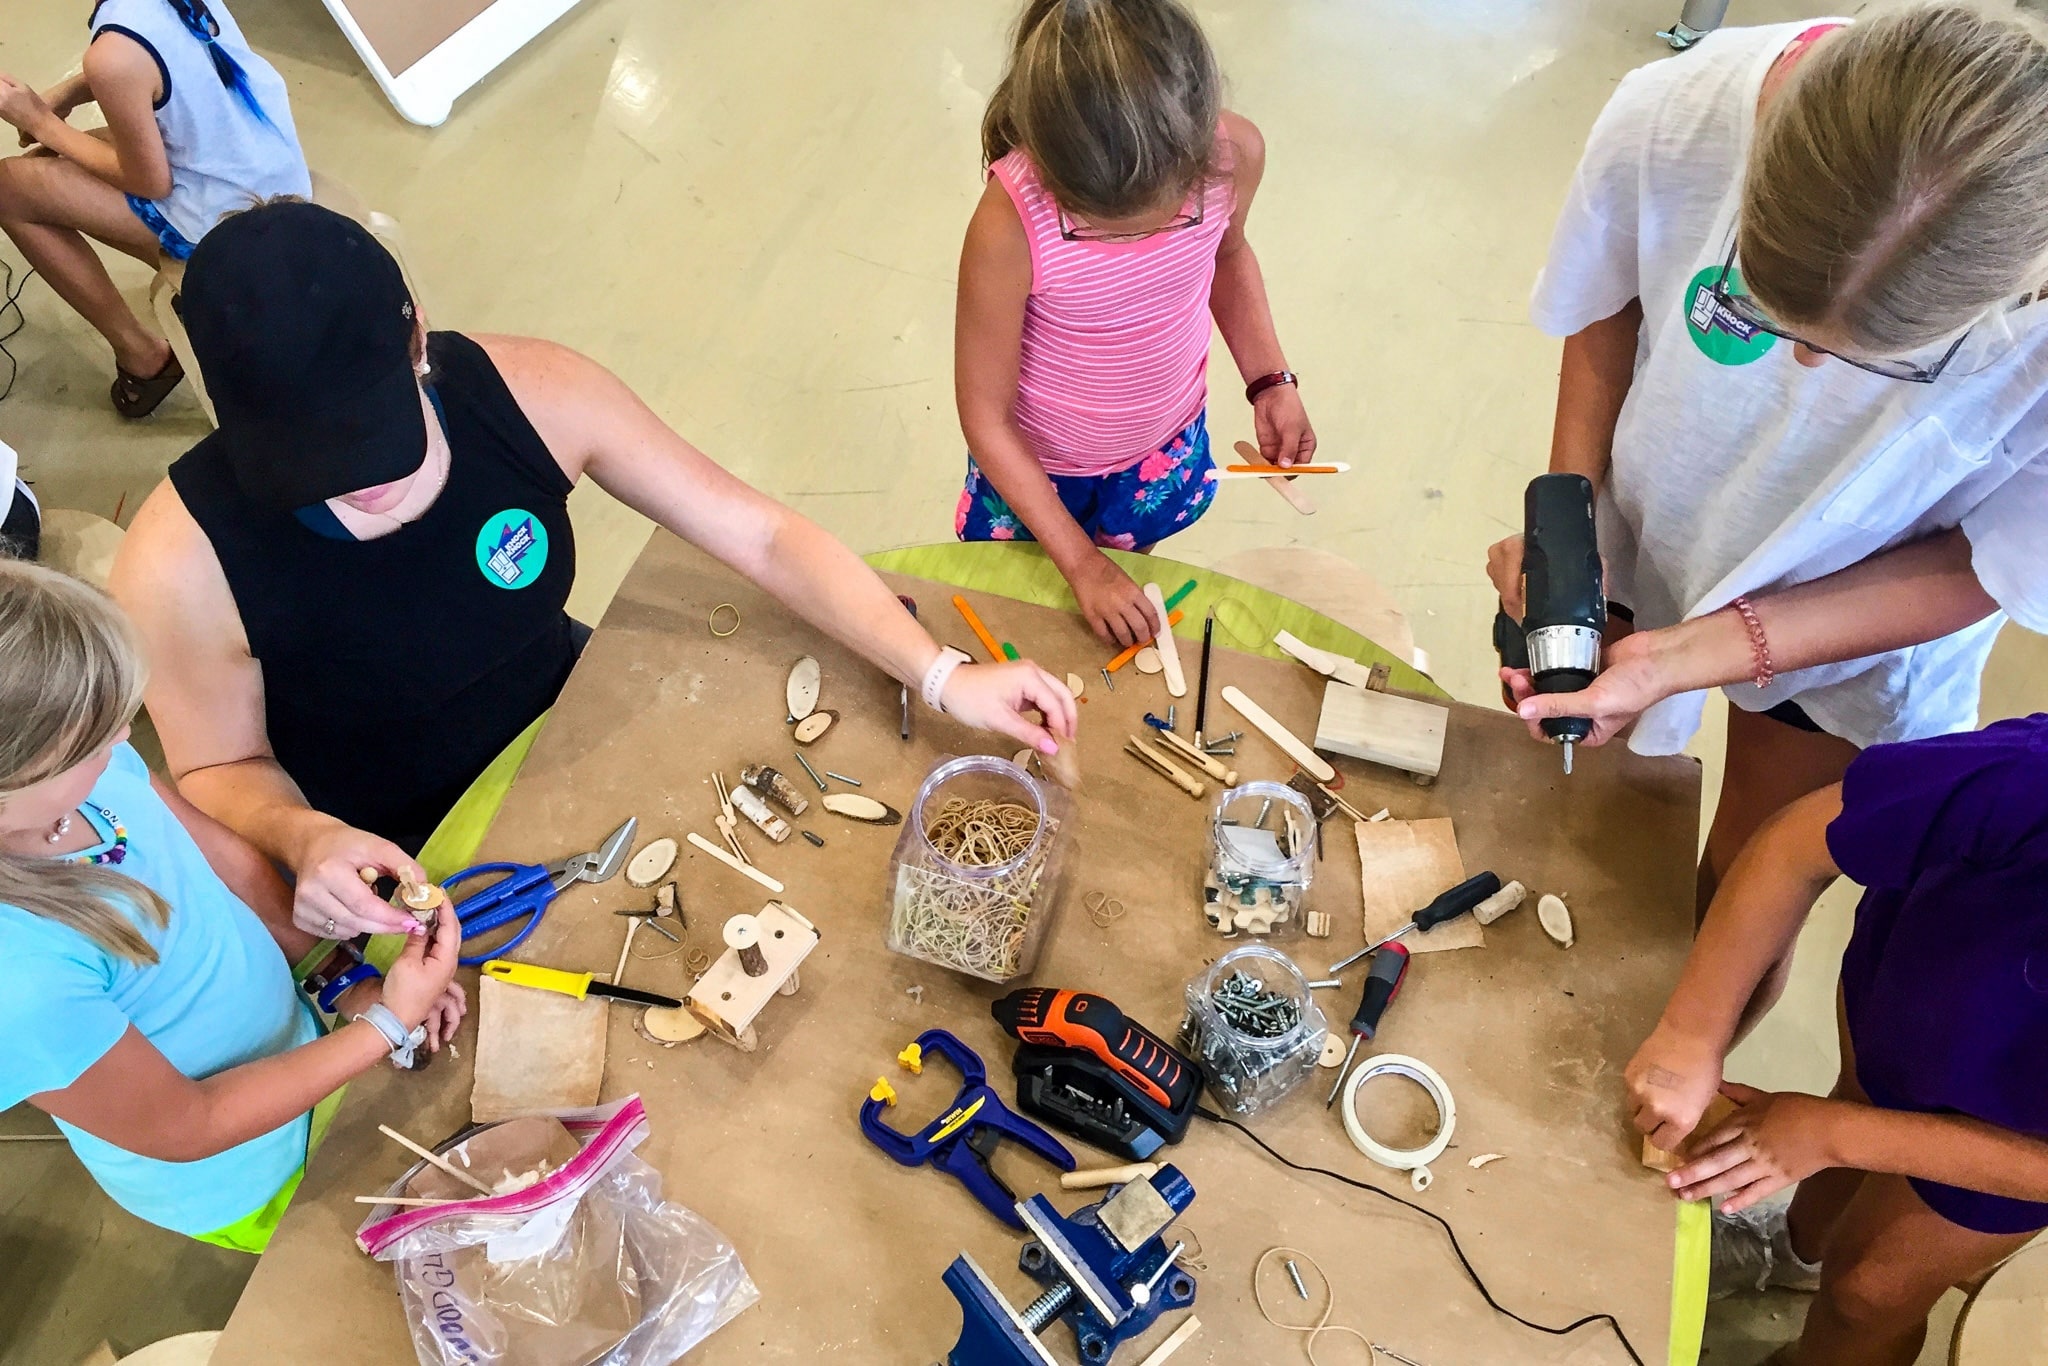 A group of children and adults using craft supplies to construct toys